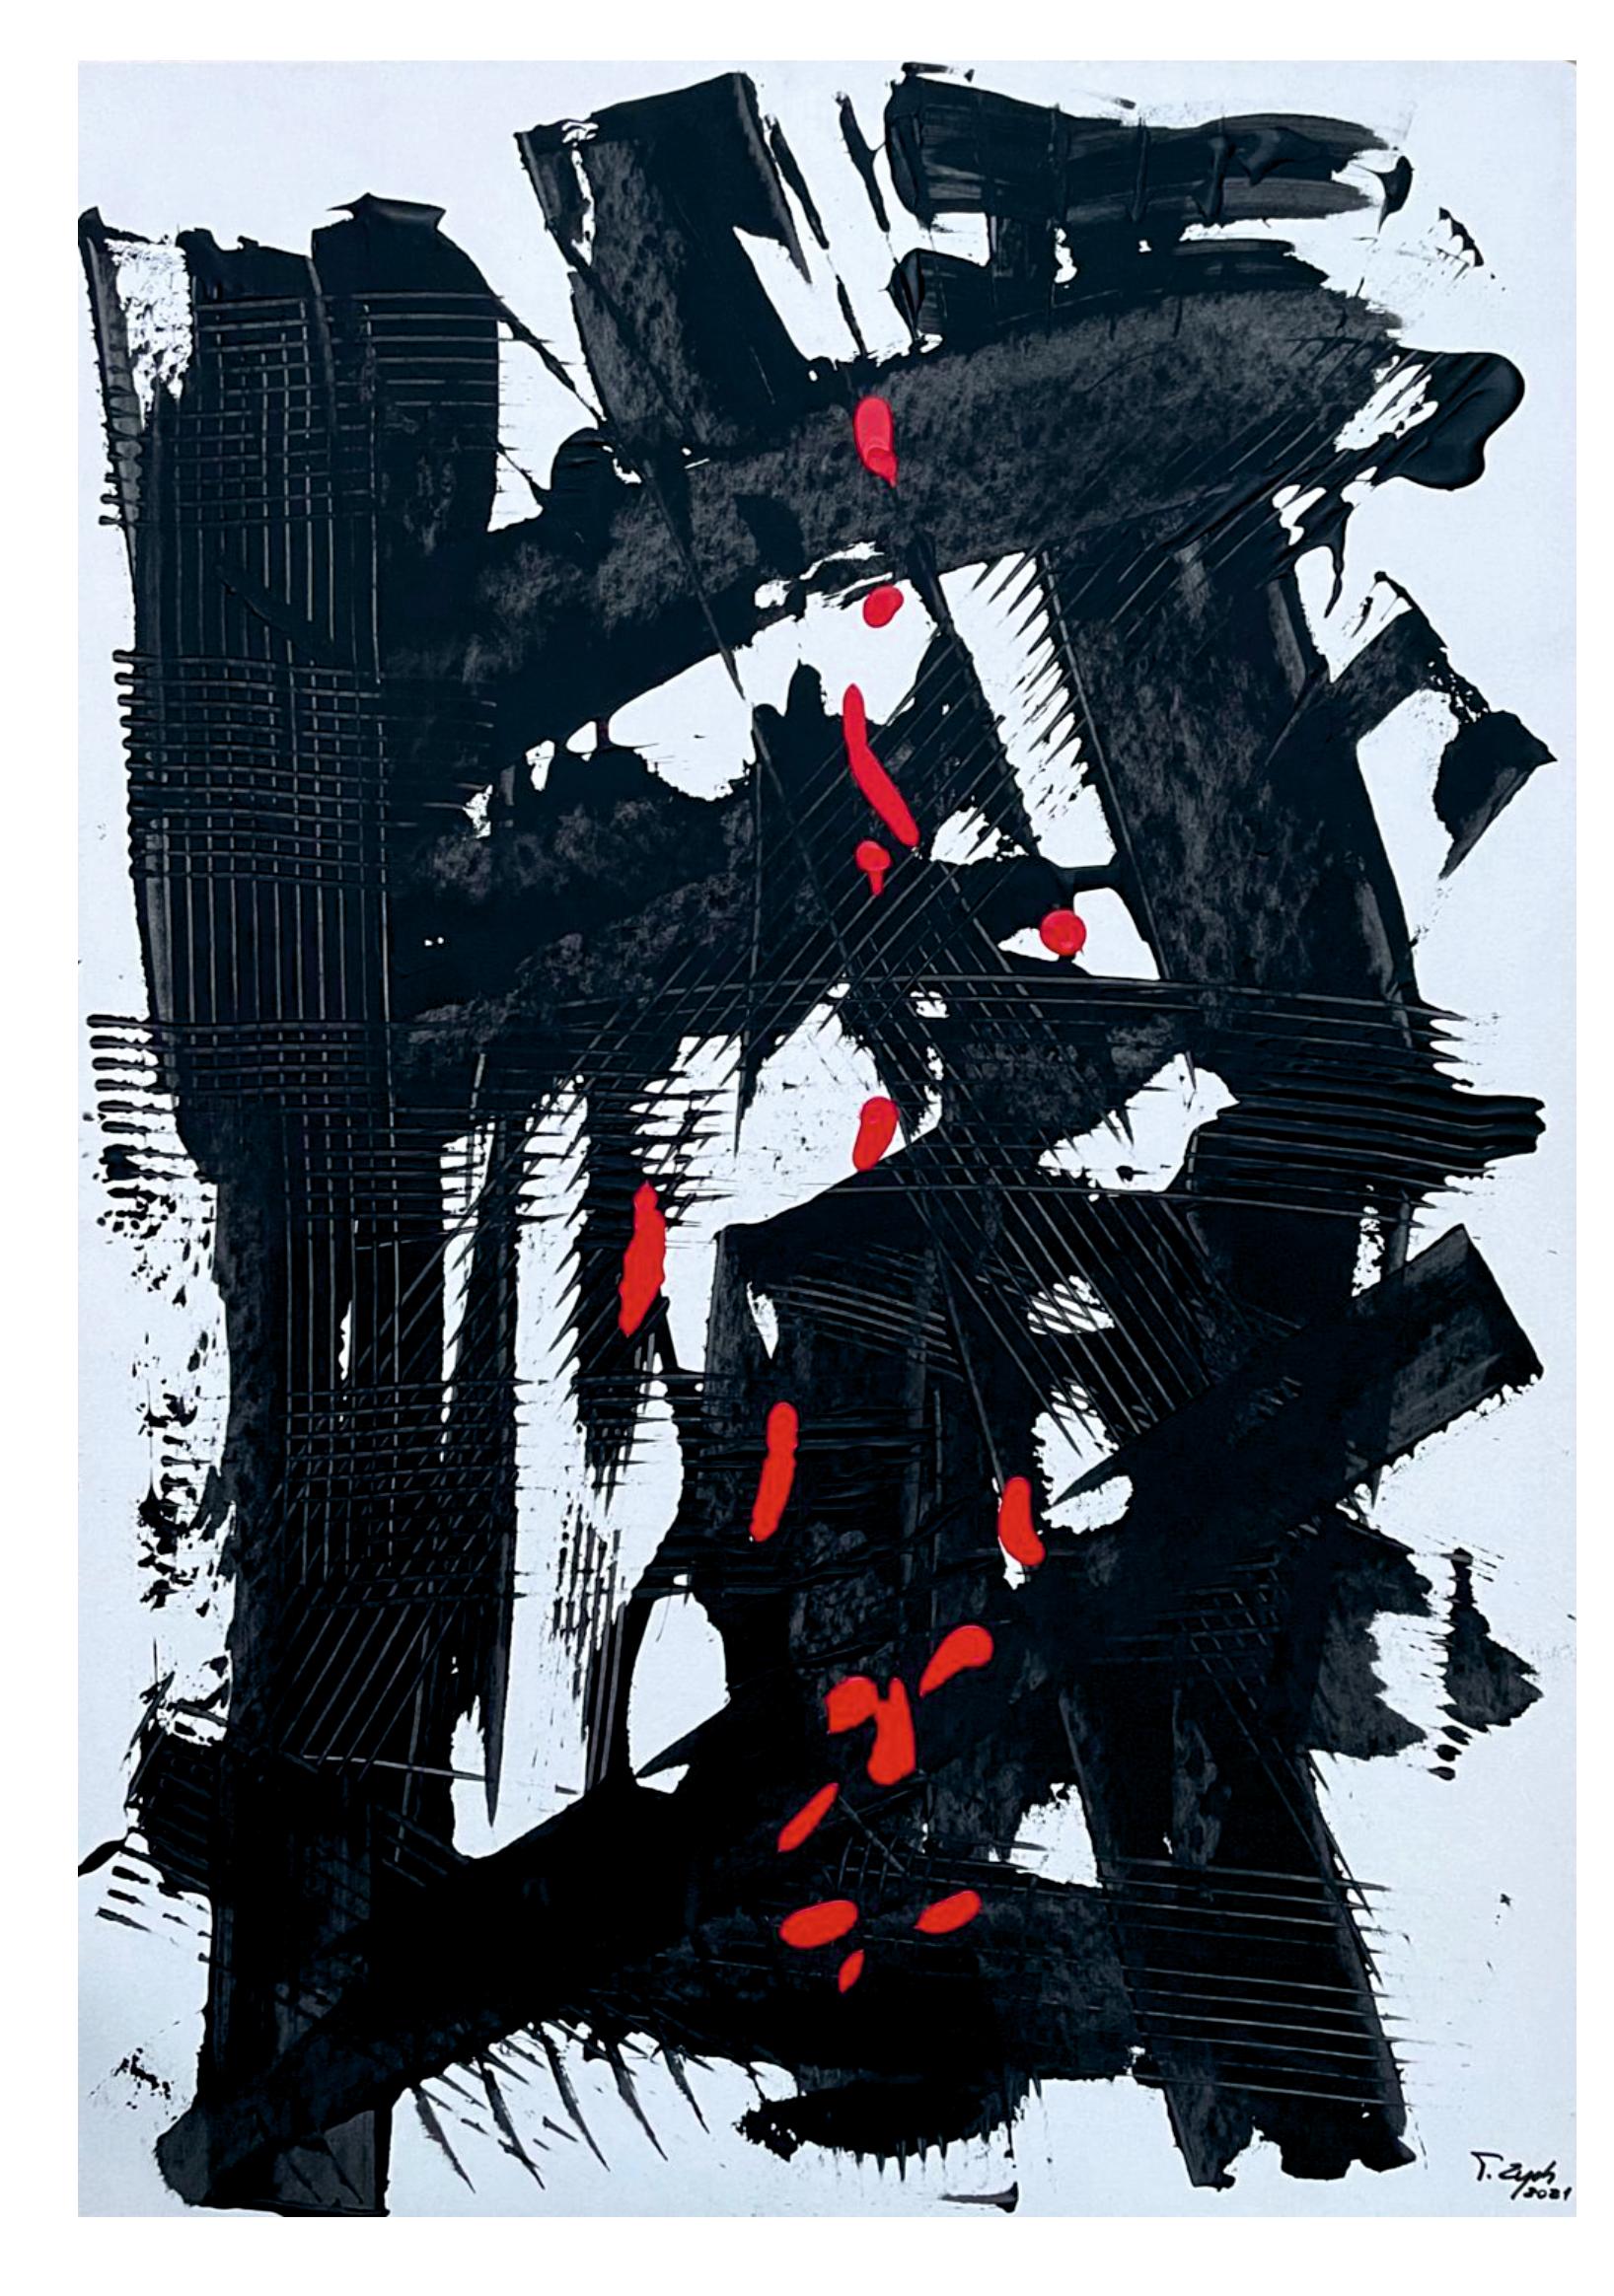 Tadeusz Zych Abstract Painting - "Red and black dreams" / Acrylic on cardboard / 100 x 70 cm